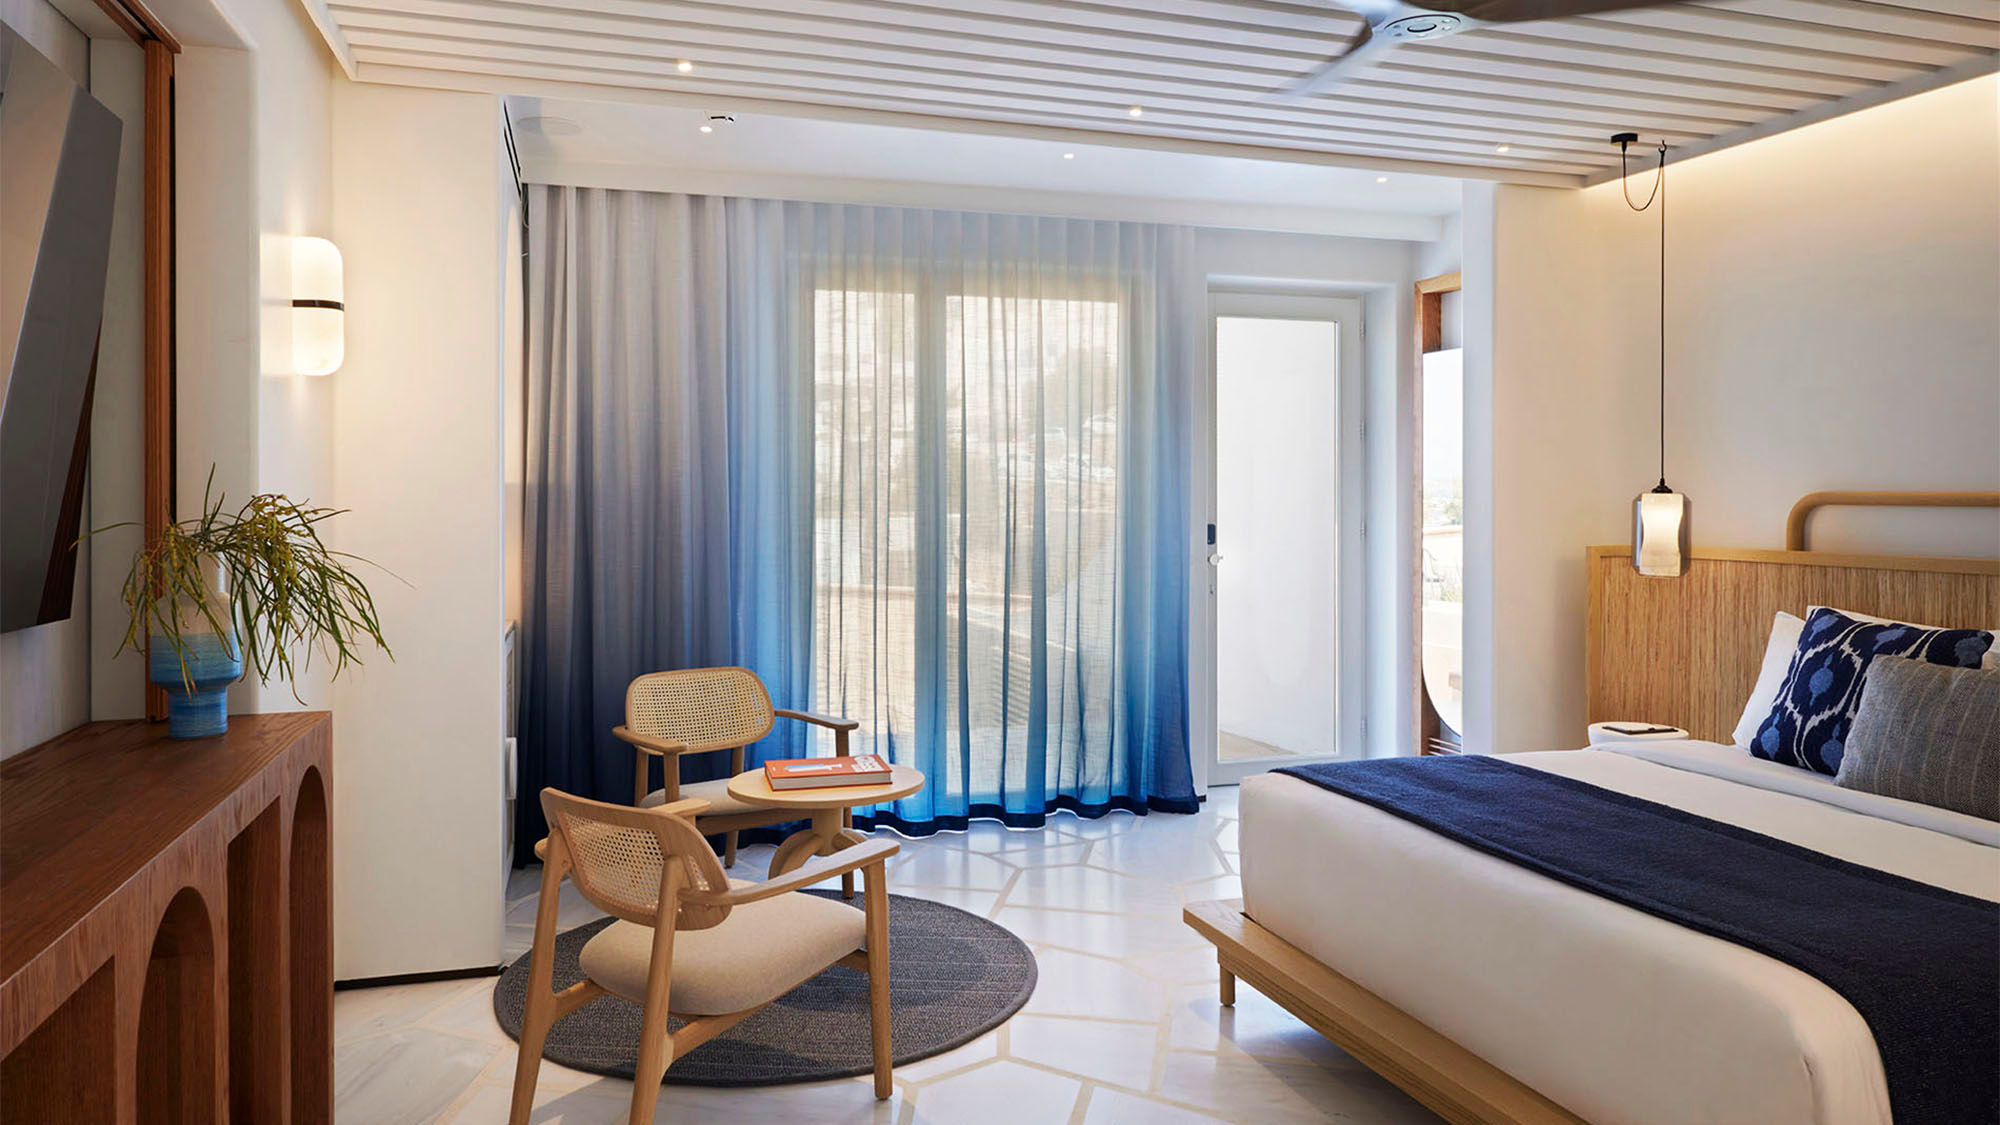 A guestroom at Avant Mar, which opened in July on the Greek island of Paros.